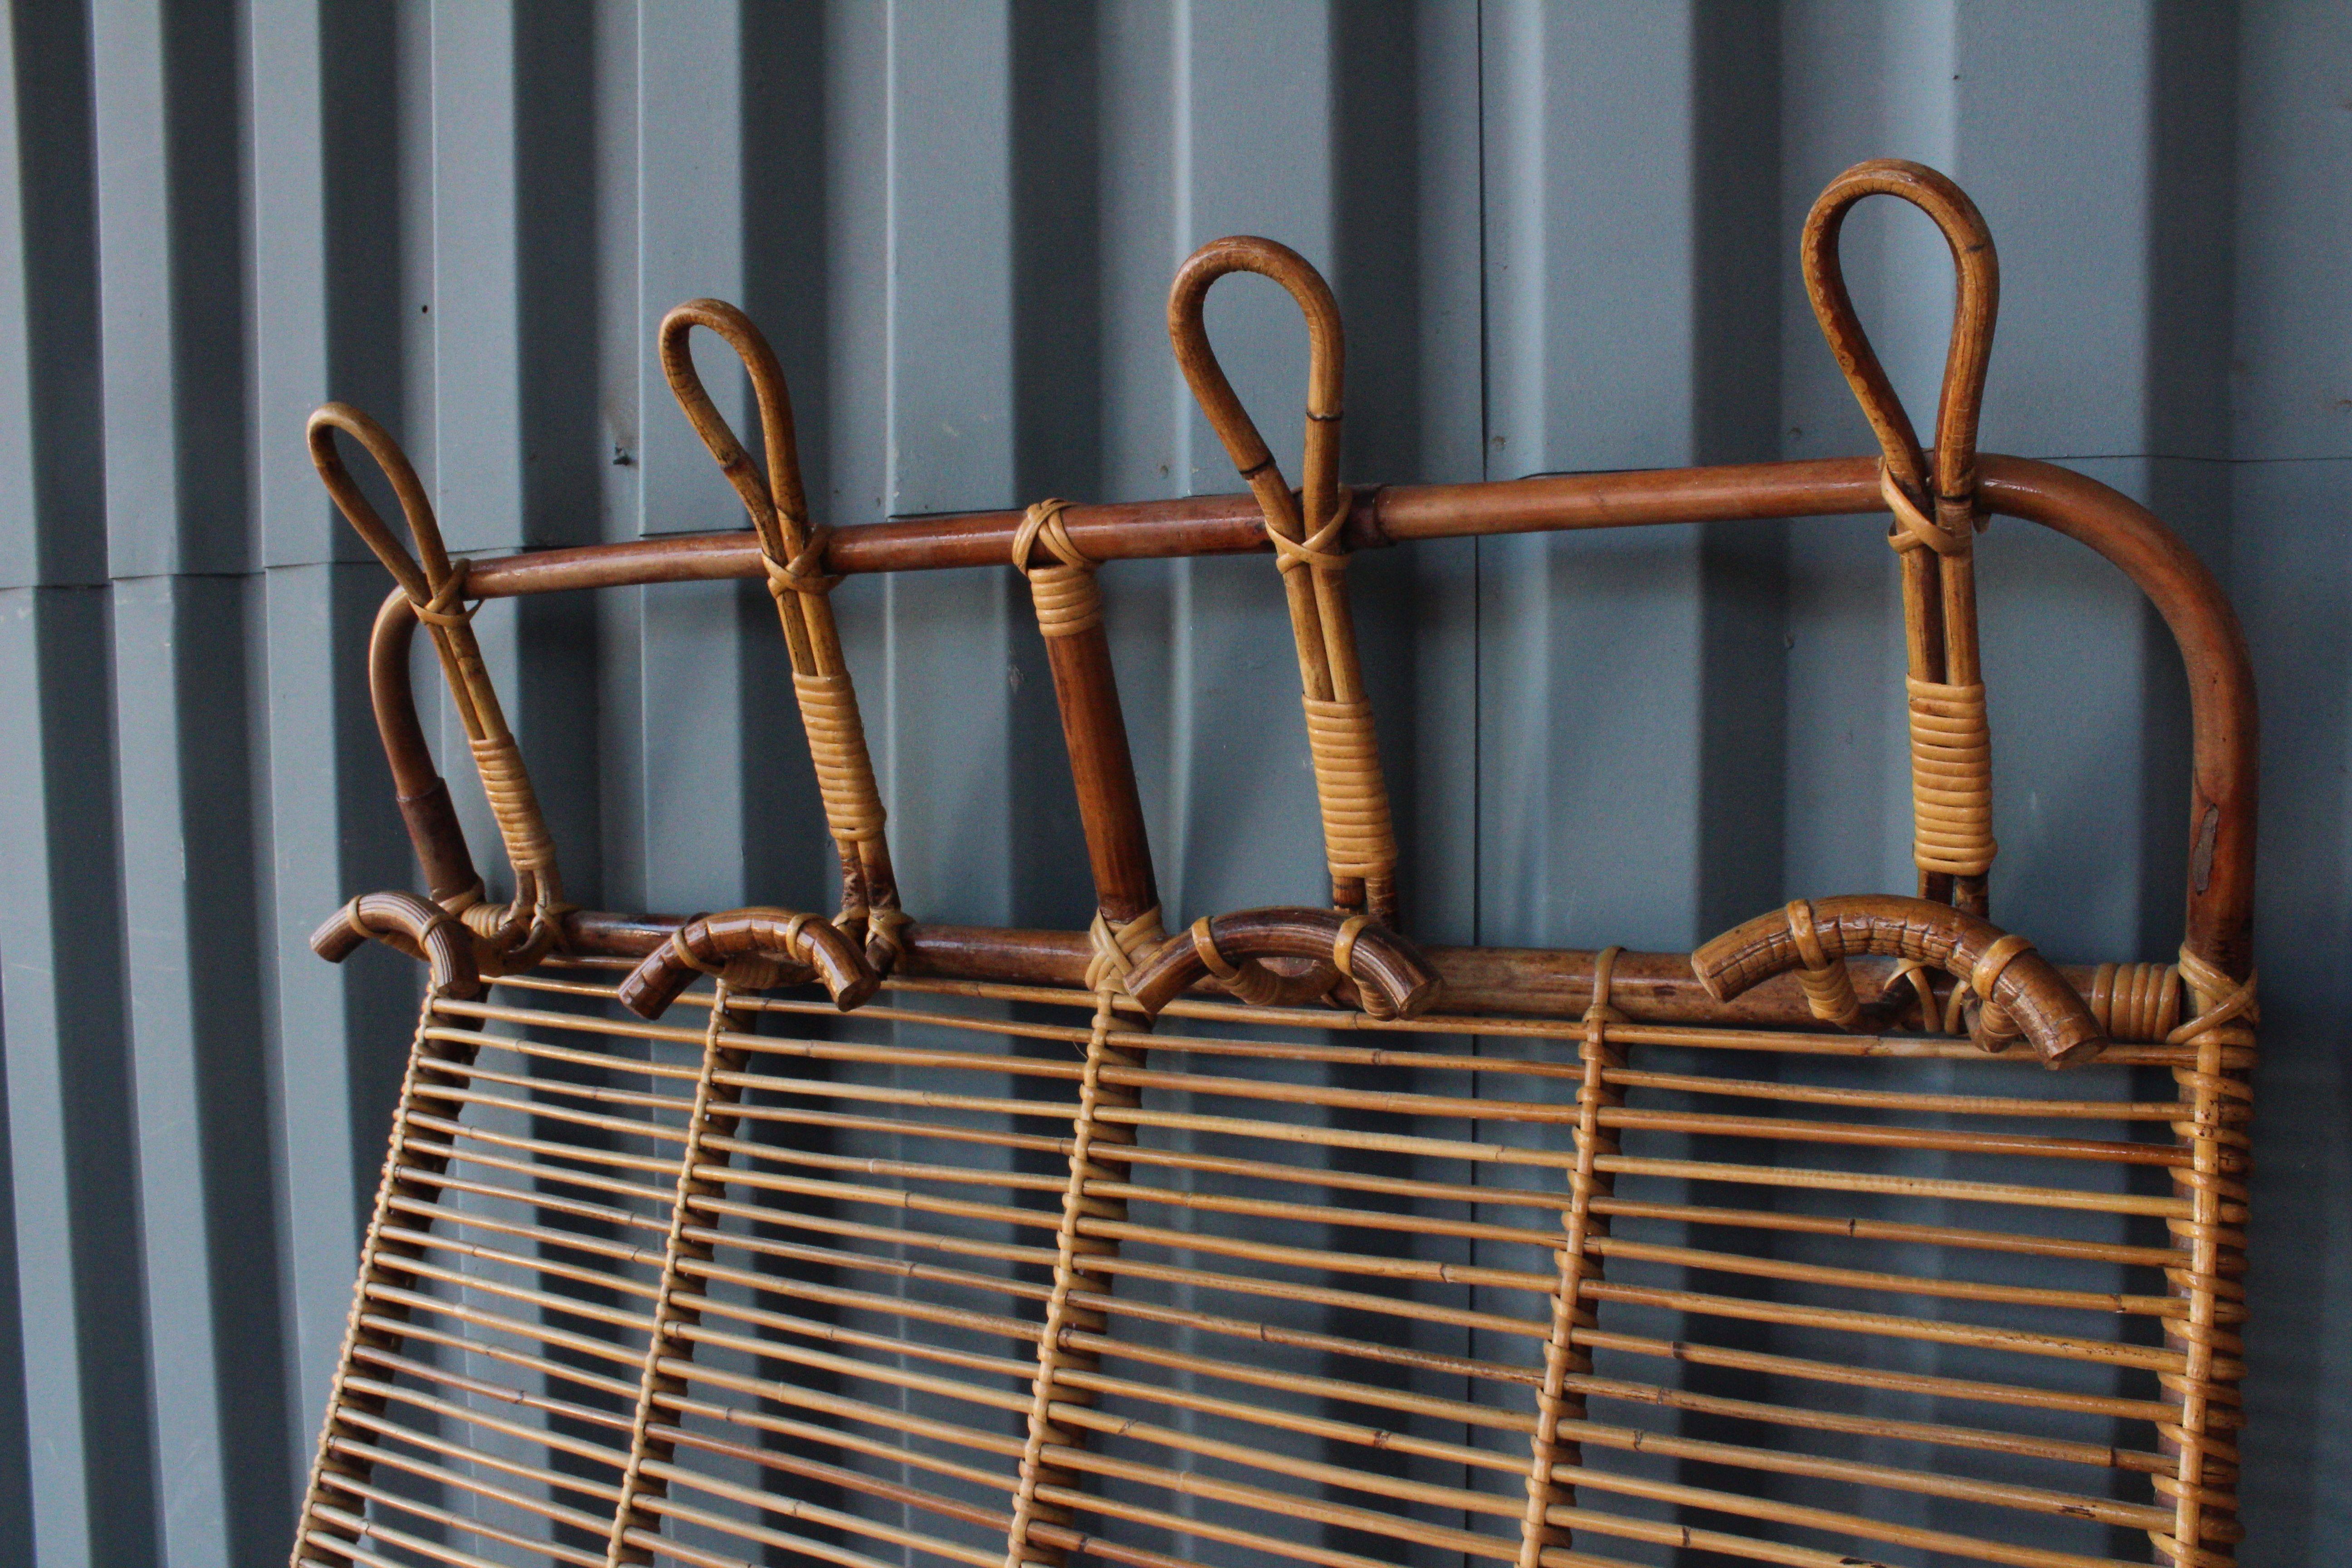 Rare bamboo and rattan coat rack by Franco Albini for Bonacina, made in Italy, circa 1950s.
Excellent vintage condition.